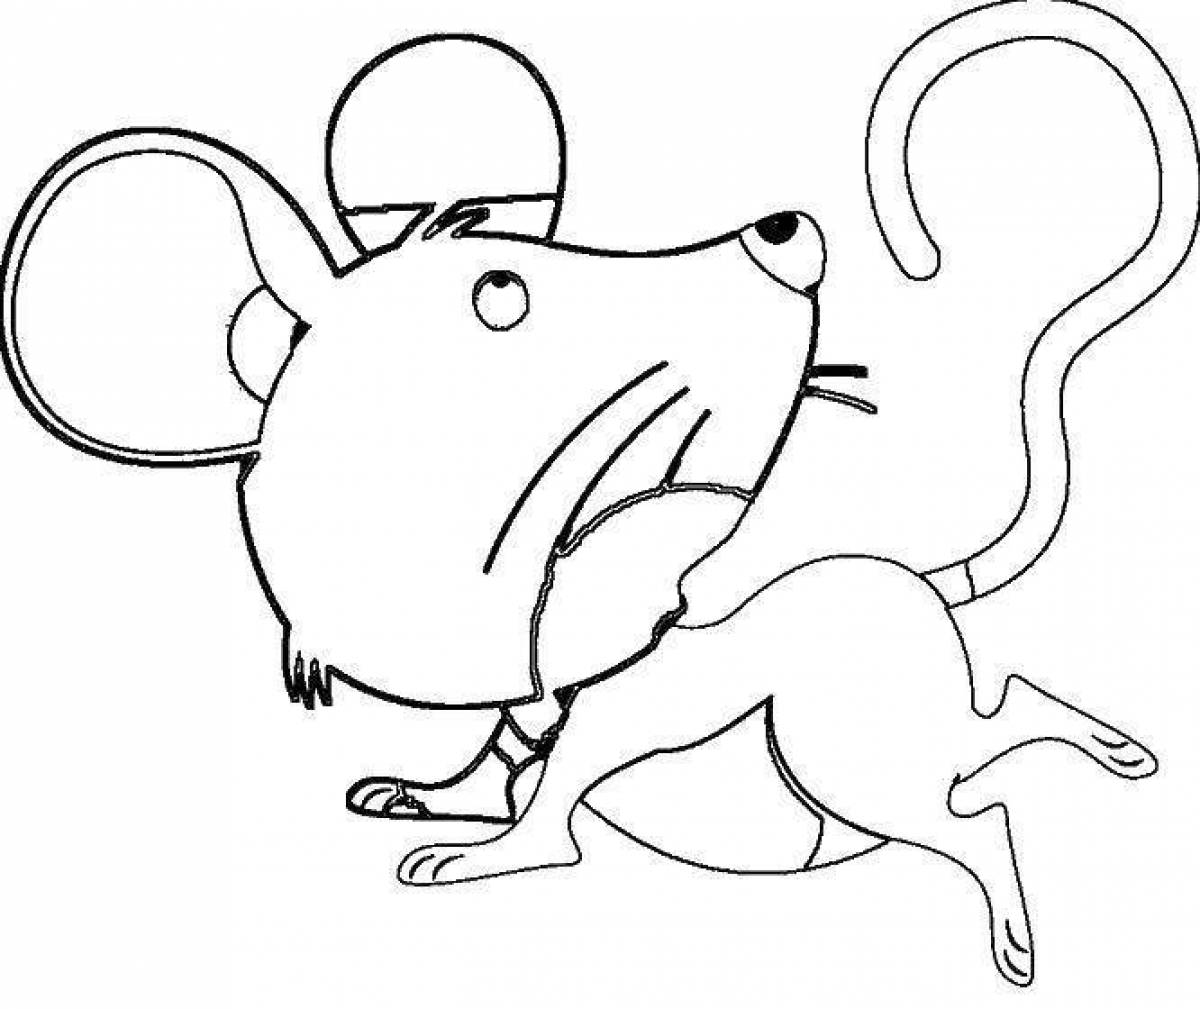 Bright mouse team coloring page